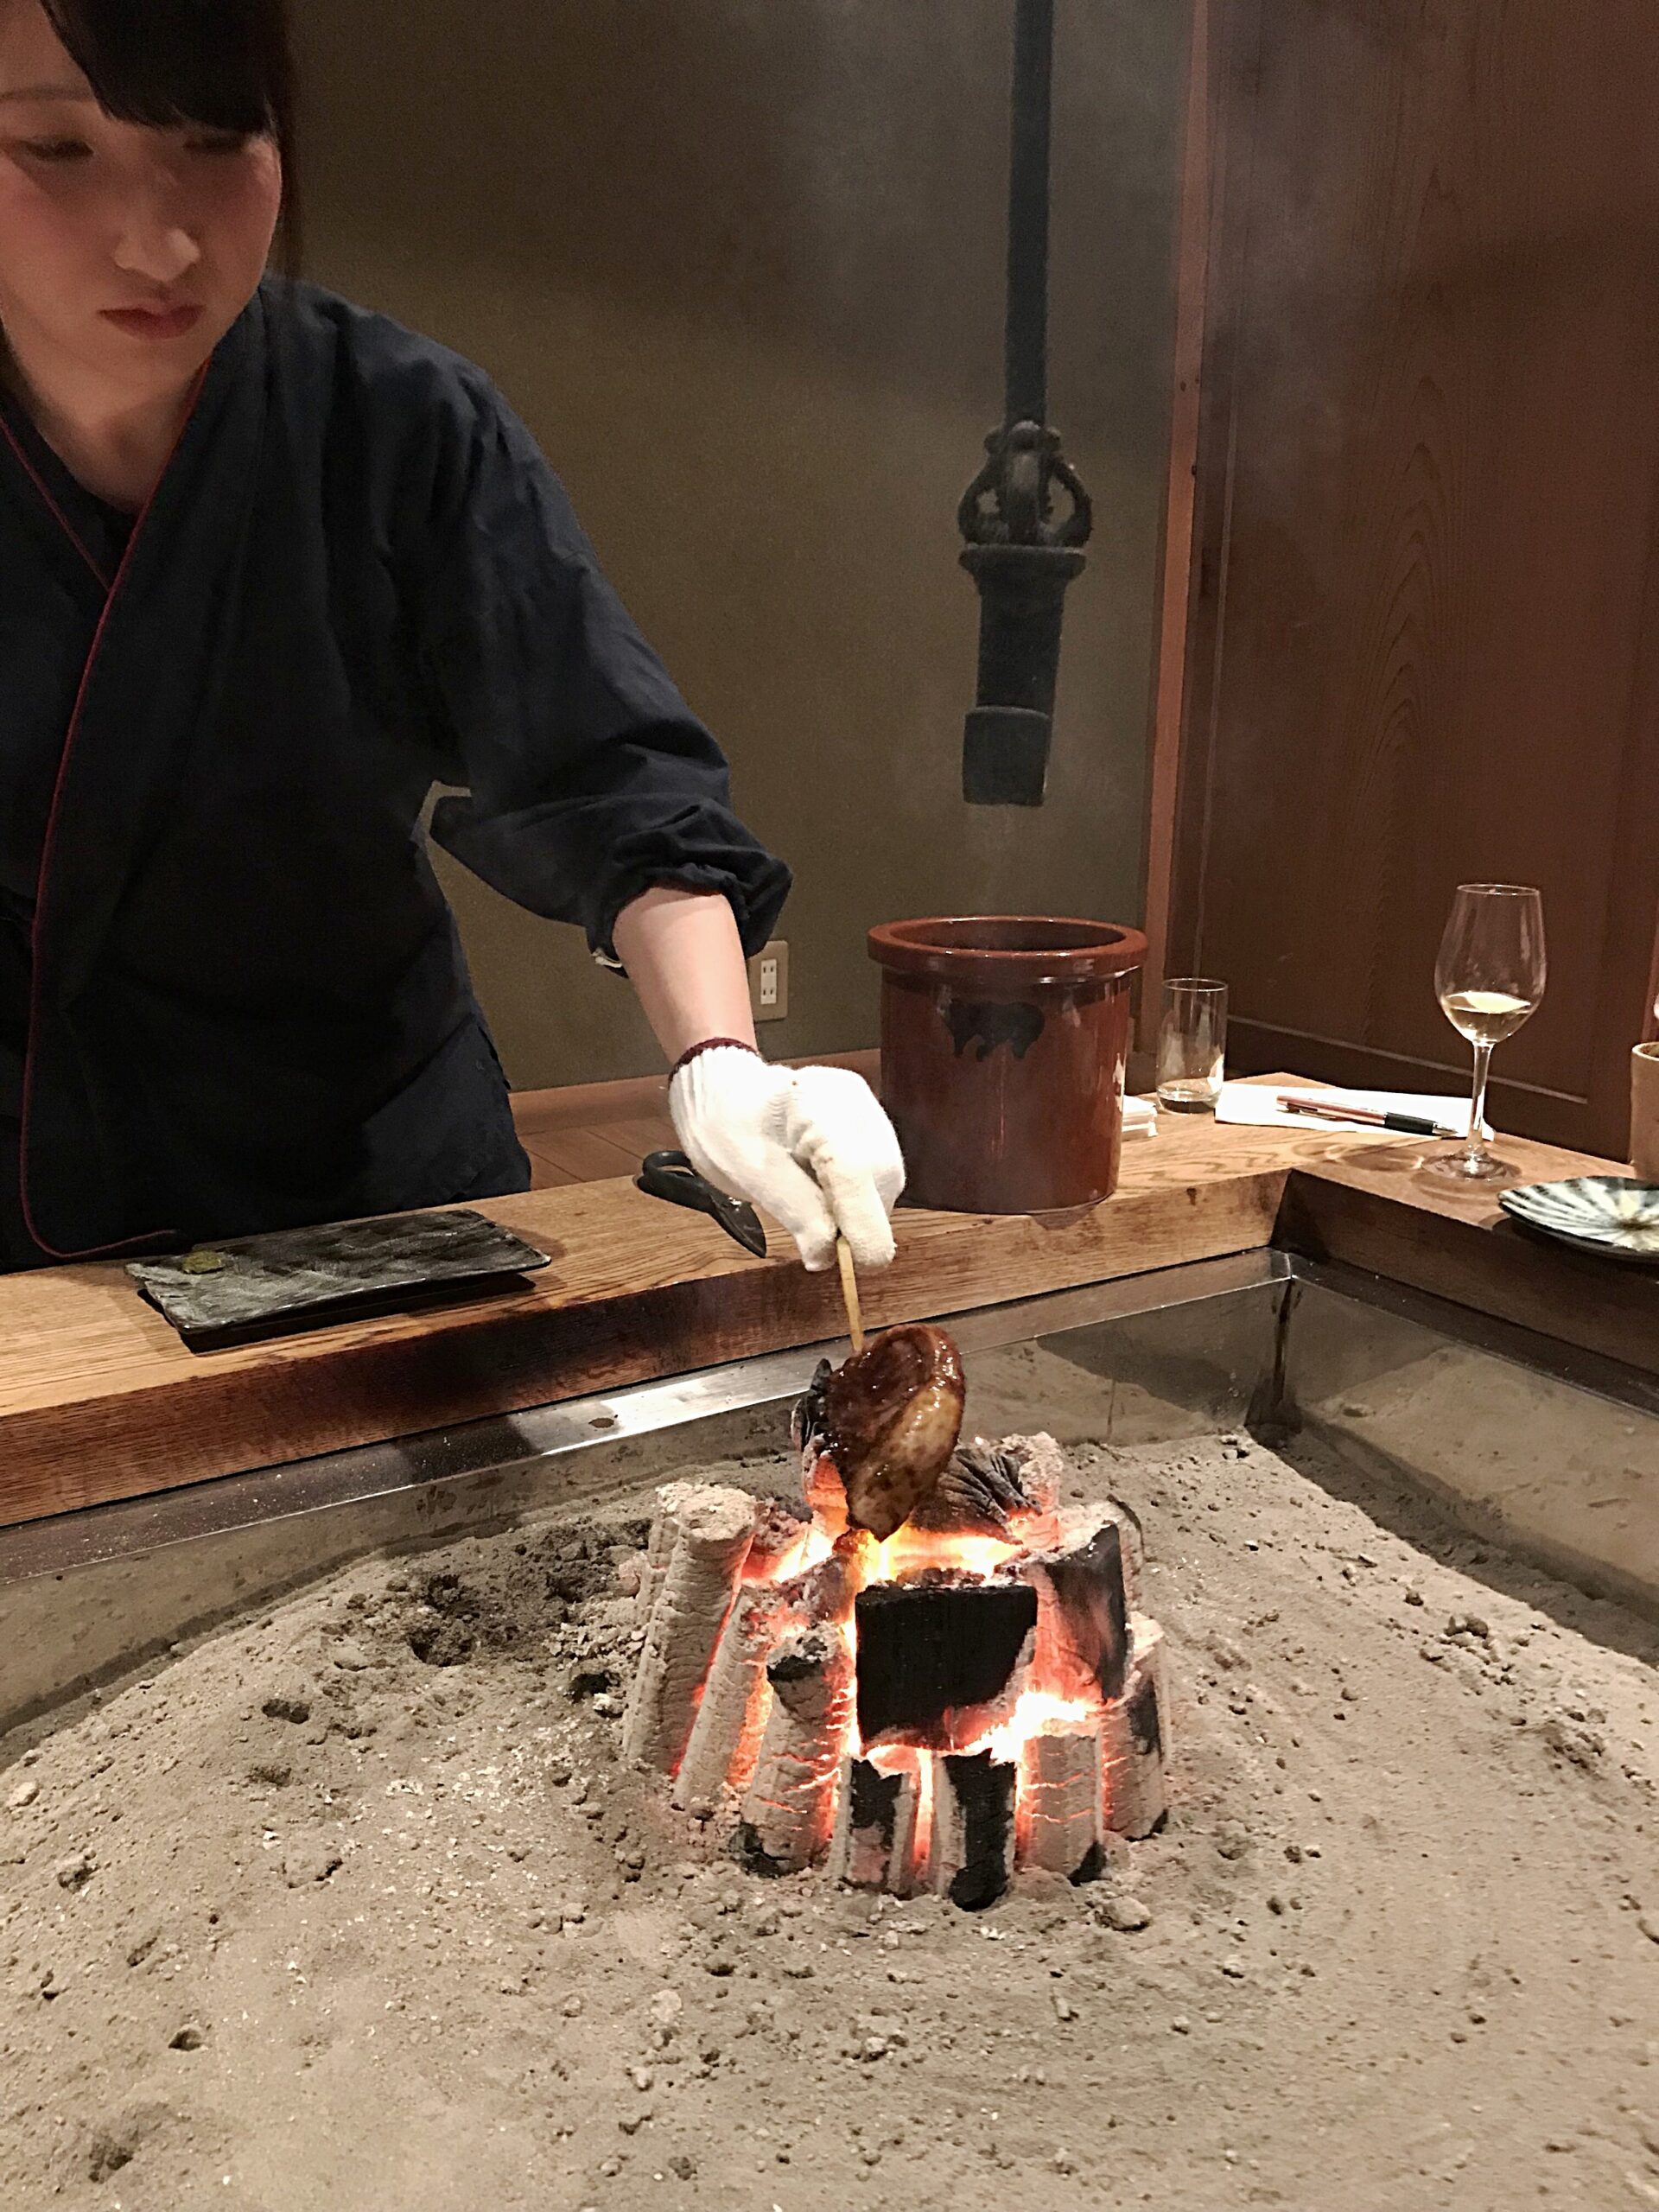 Japan Journey Journal, Part Two: Restaurant Yanagiya, A Revered Country Cuisine Sketched In Charcoal